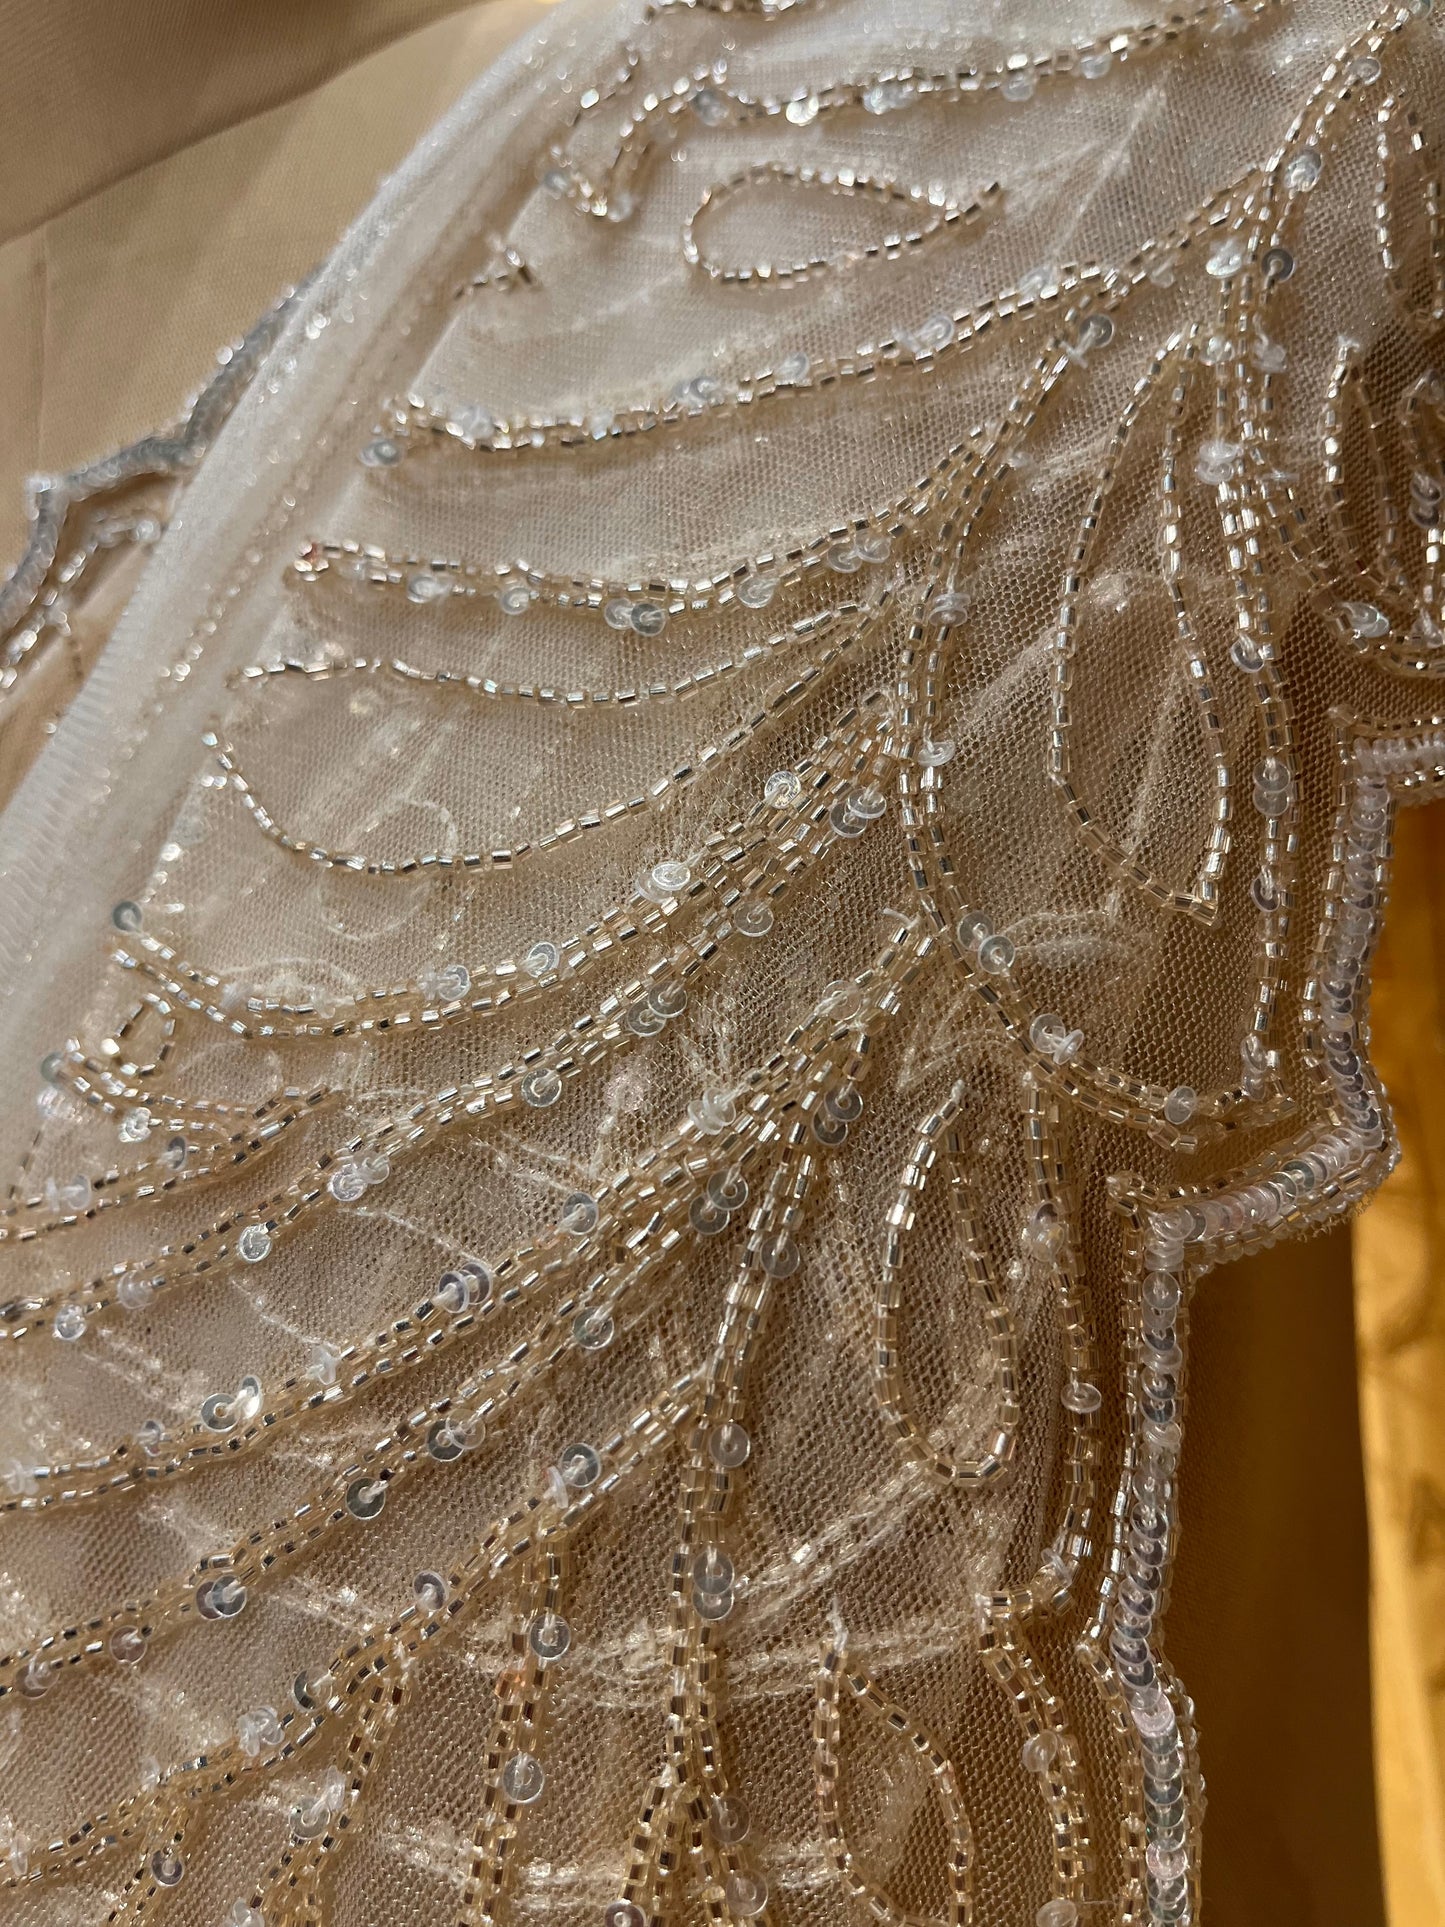 ( DELIVERY IN 25 DAYS ) Weddig Special: OFF WHITE COLOR NET HAND EMBROIDERED SAREE EMBELLISHED WITH CUTDANA & SEQUINS WORK